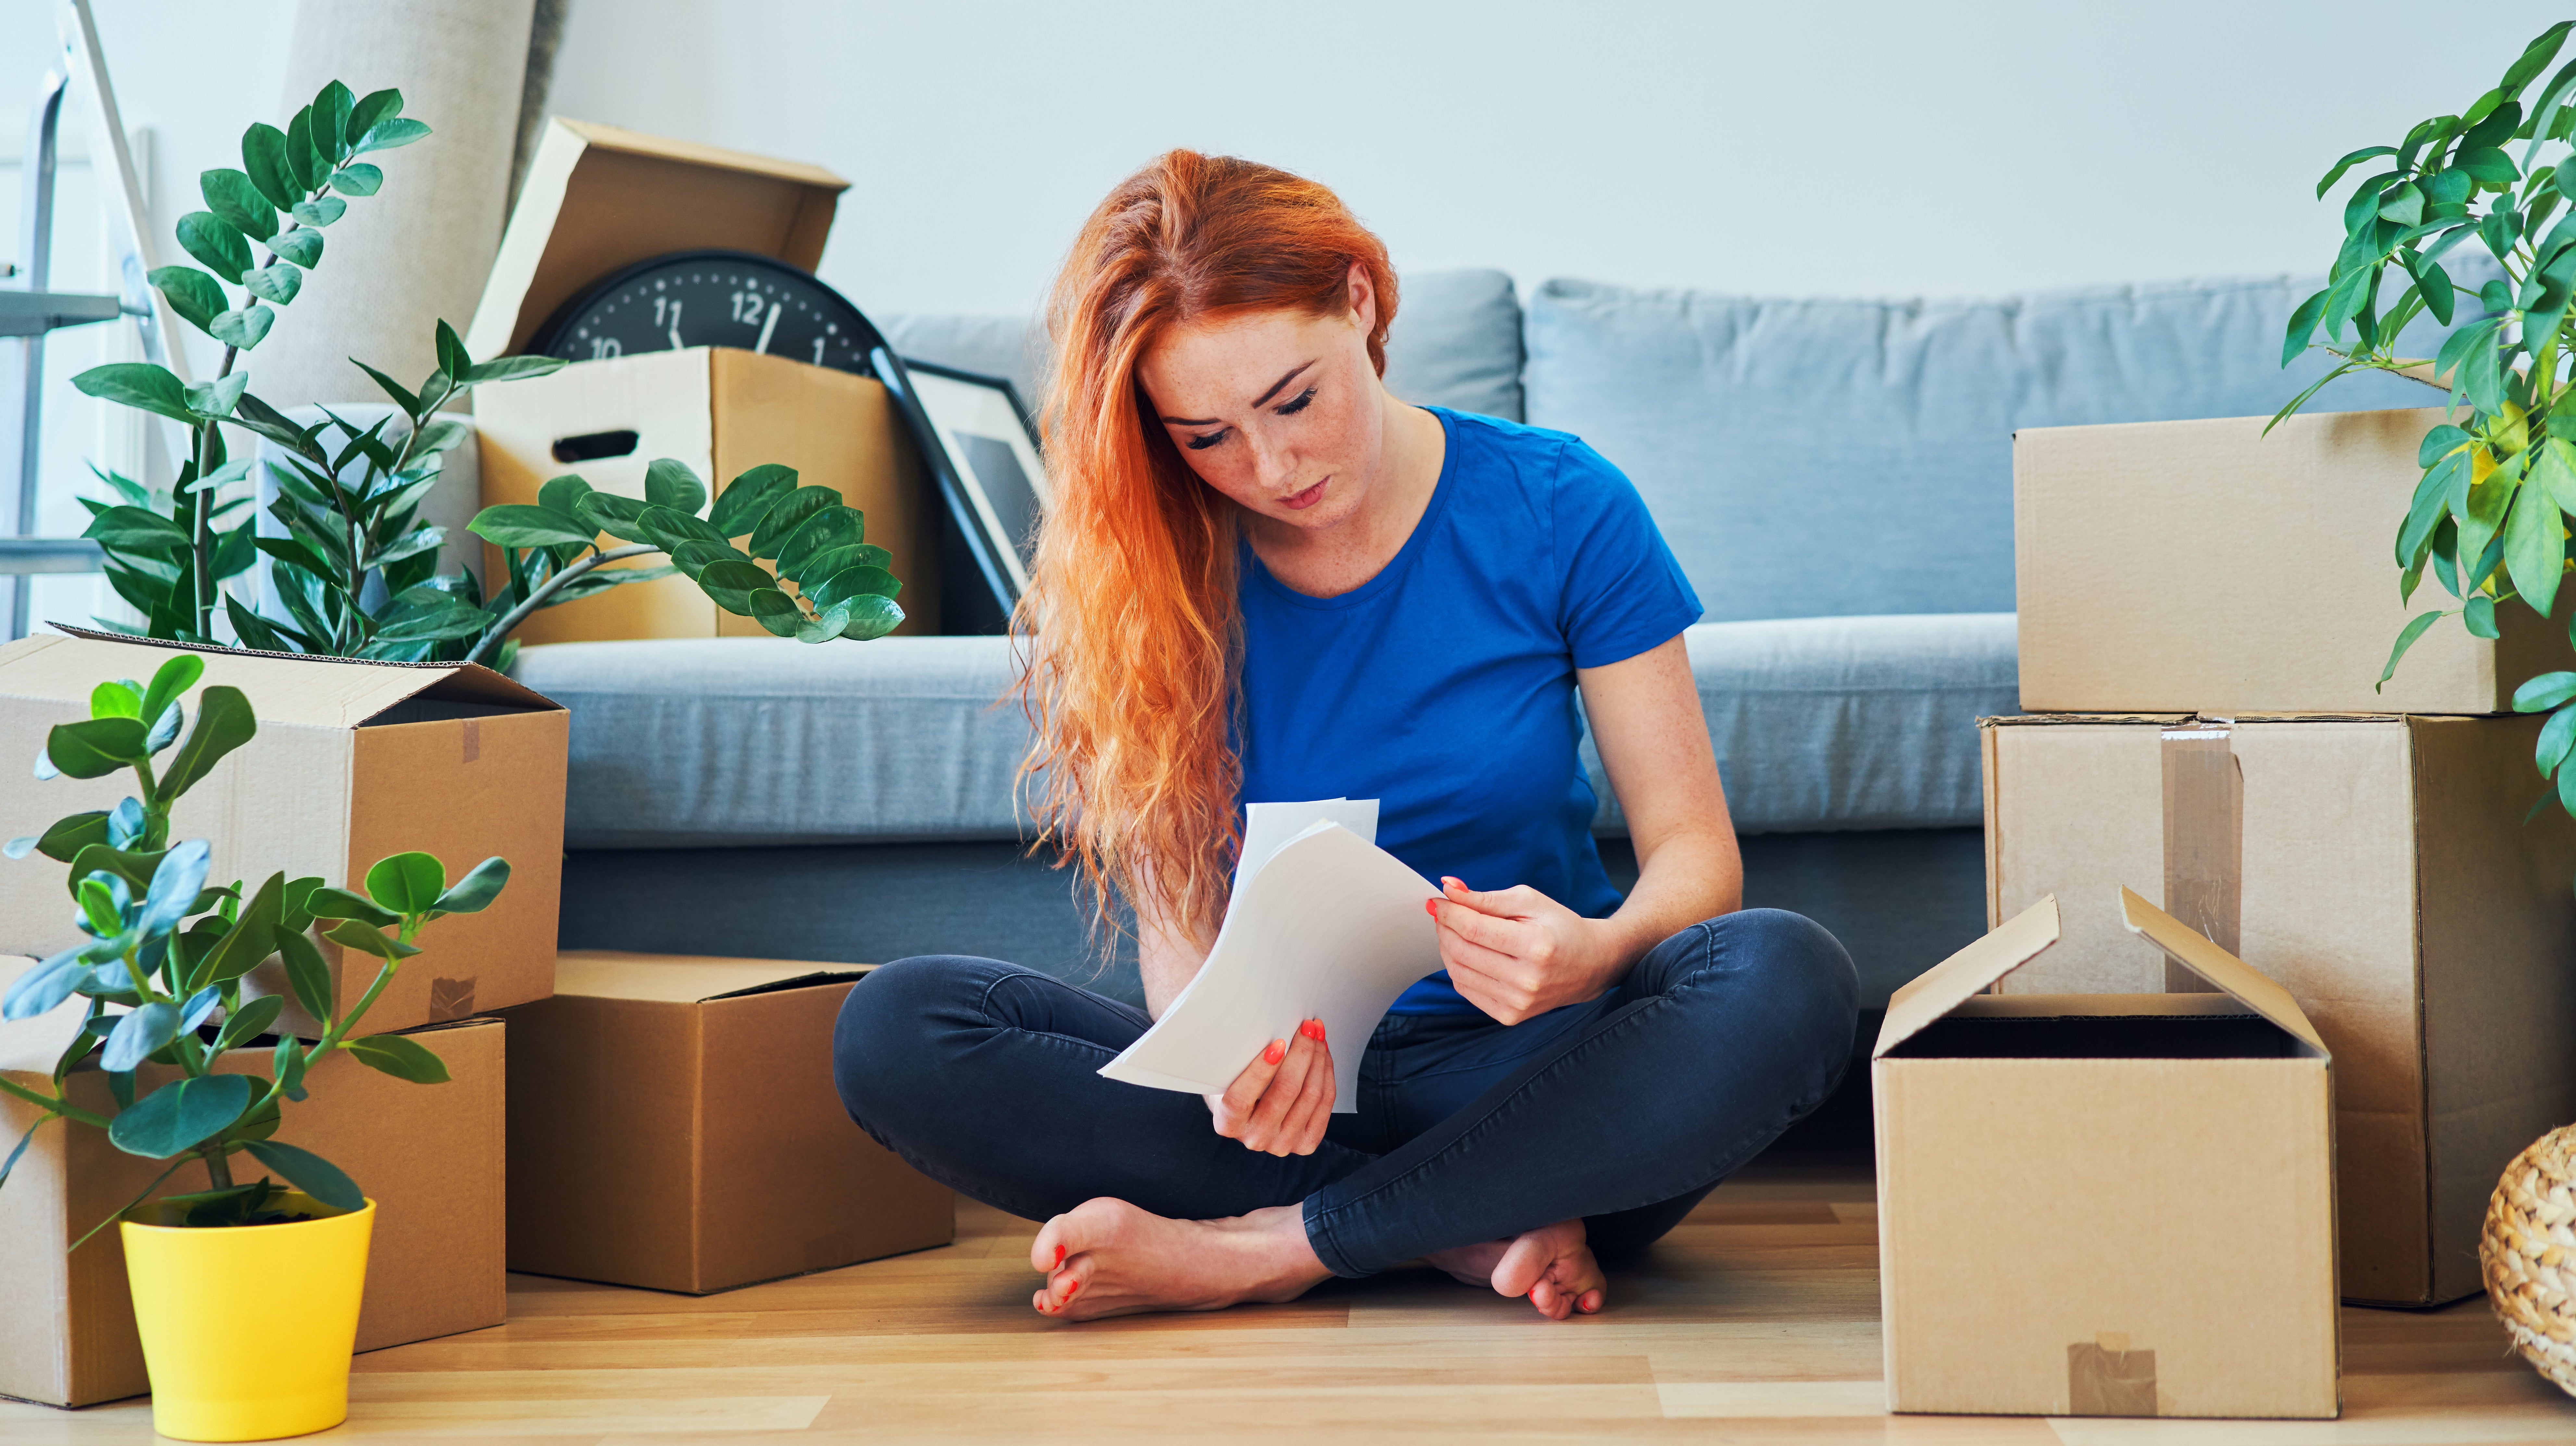 How To Spend Less When You’re Moving On Short Notice